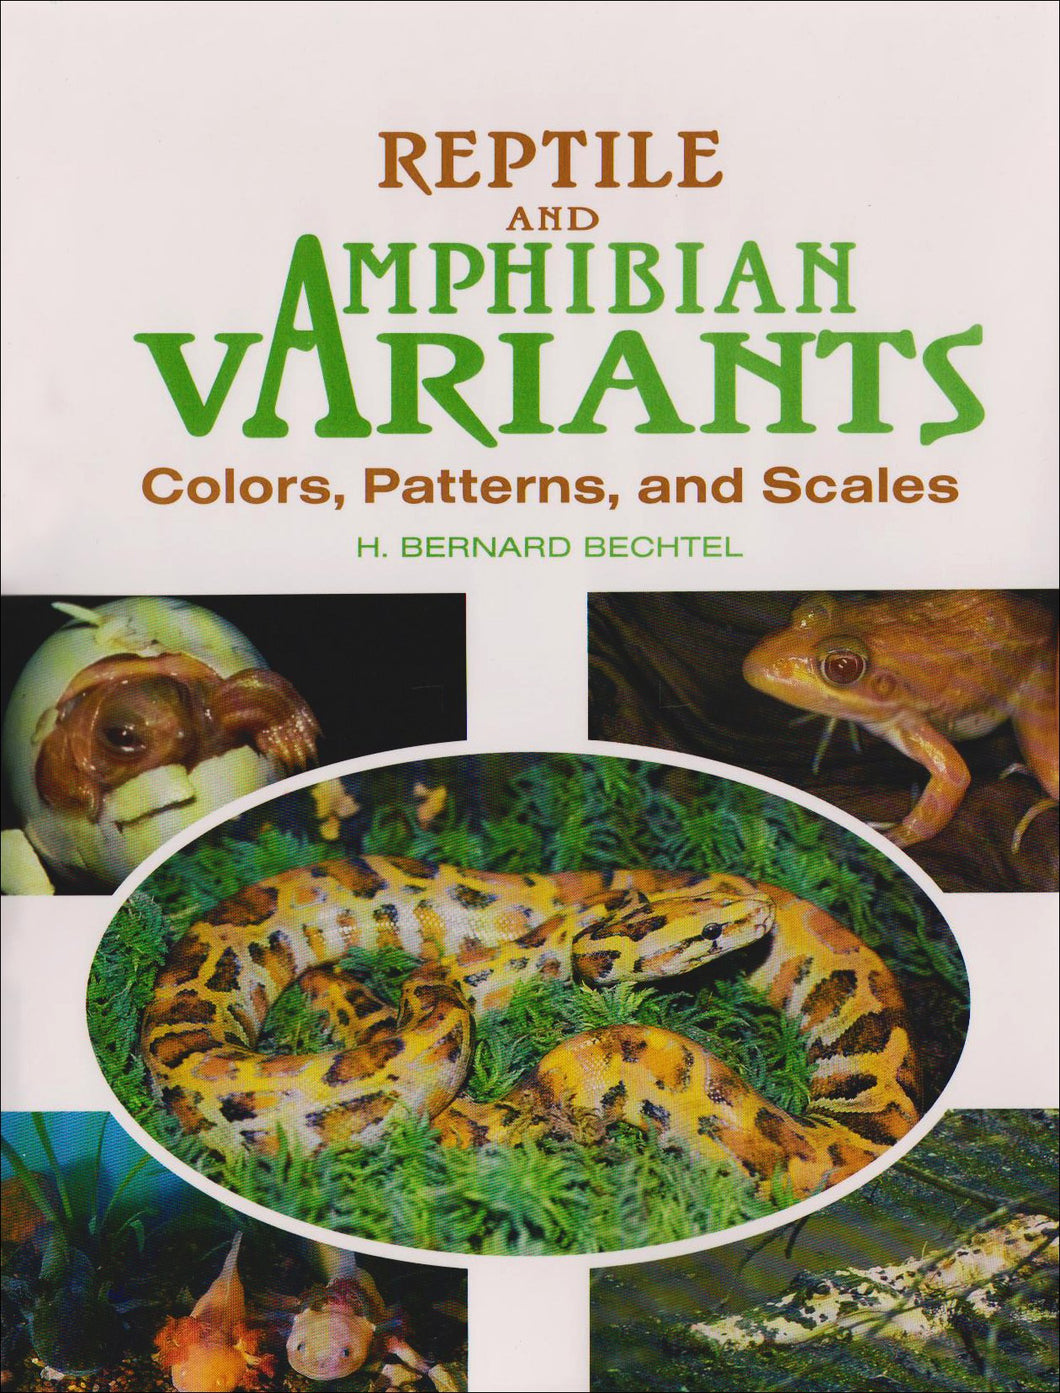 Reptile And Amphibian Variants - Colors, Patterns, and Scales